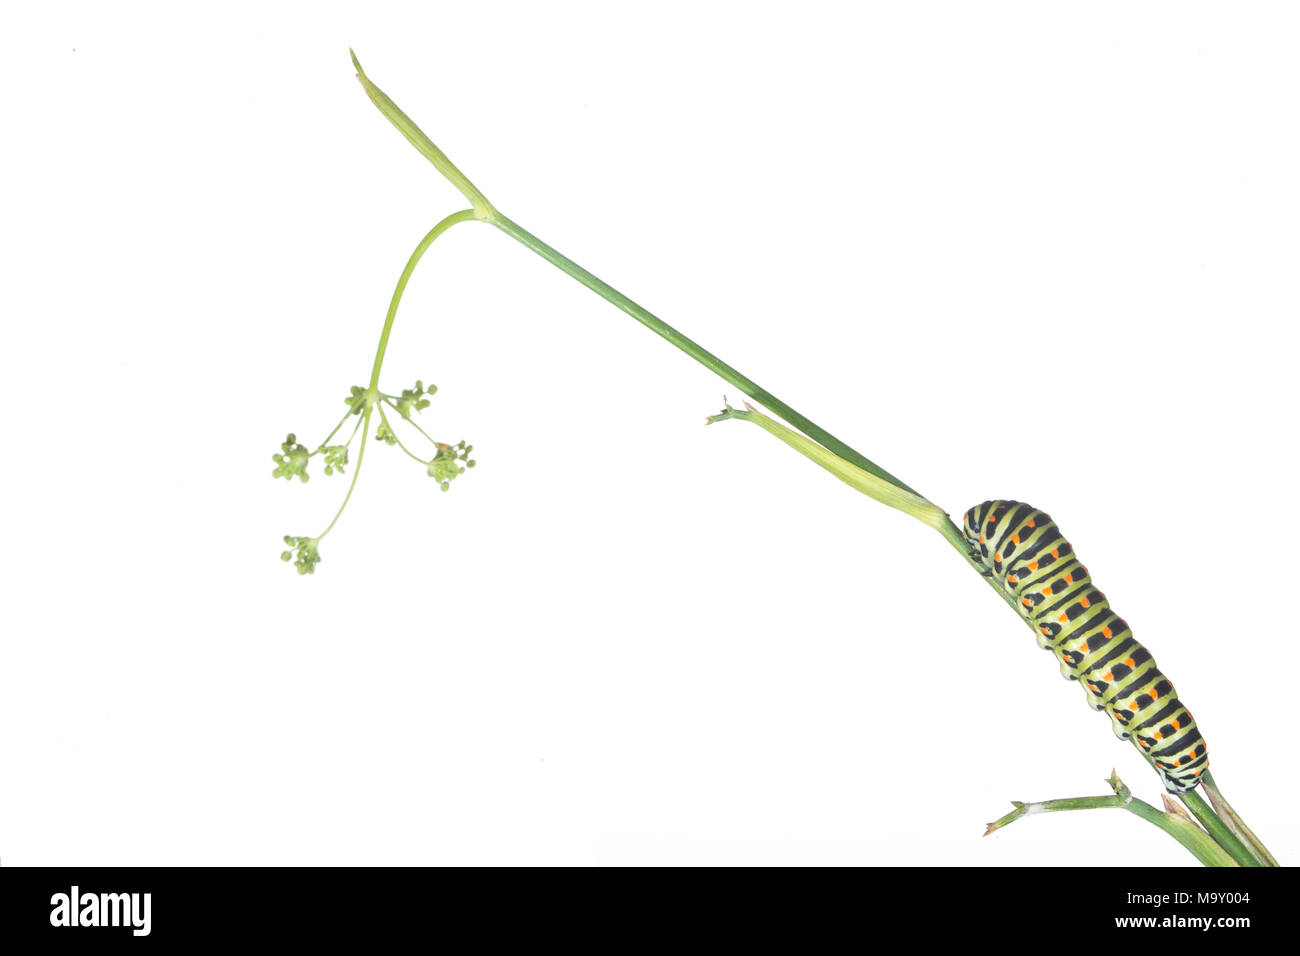 Papilio machaon caterpillar on fennel plant with white background. Stock Photo